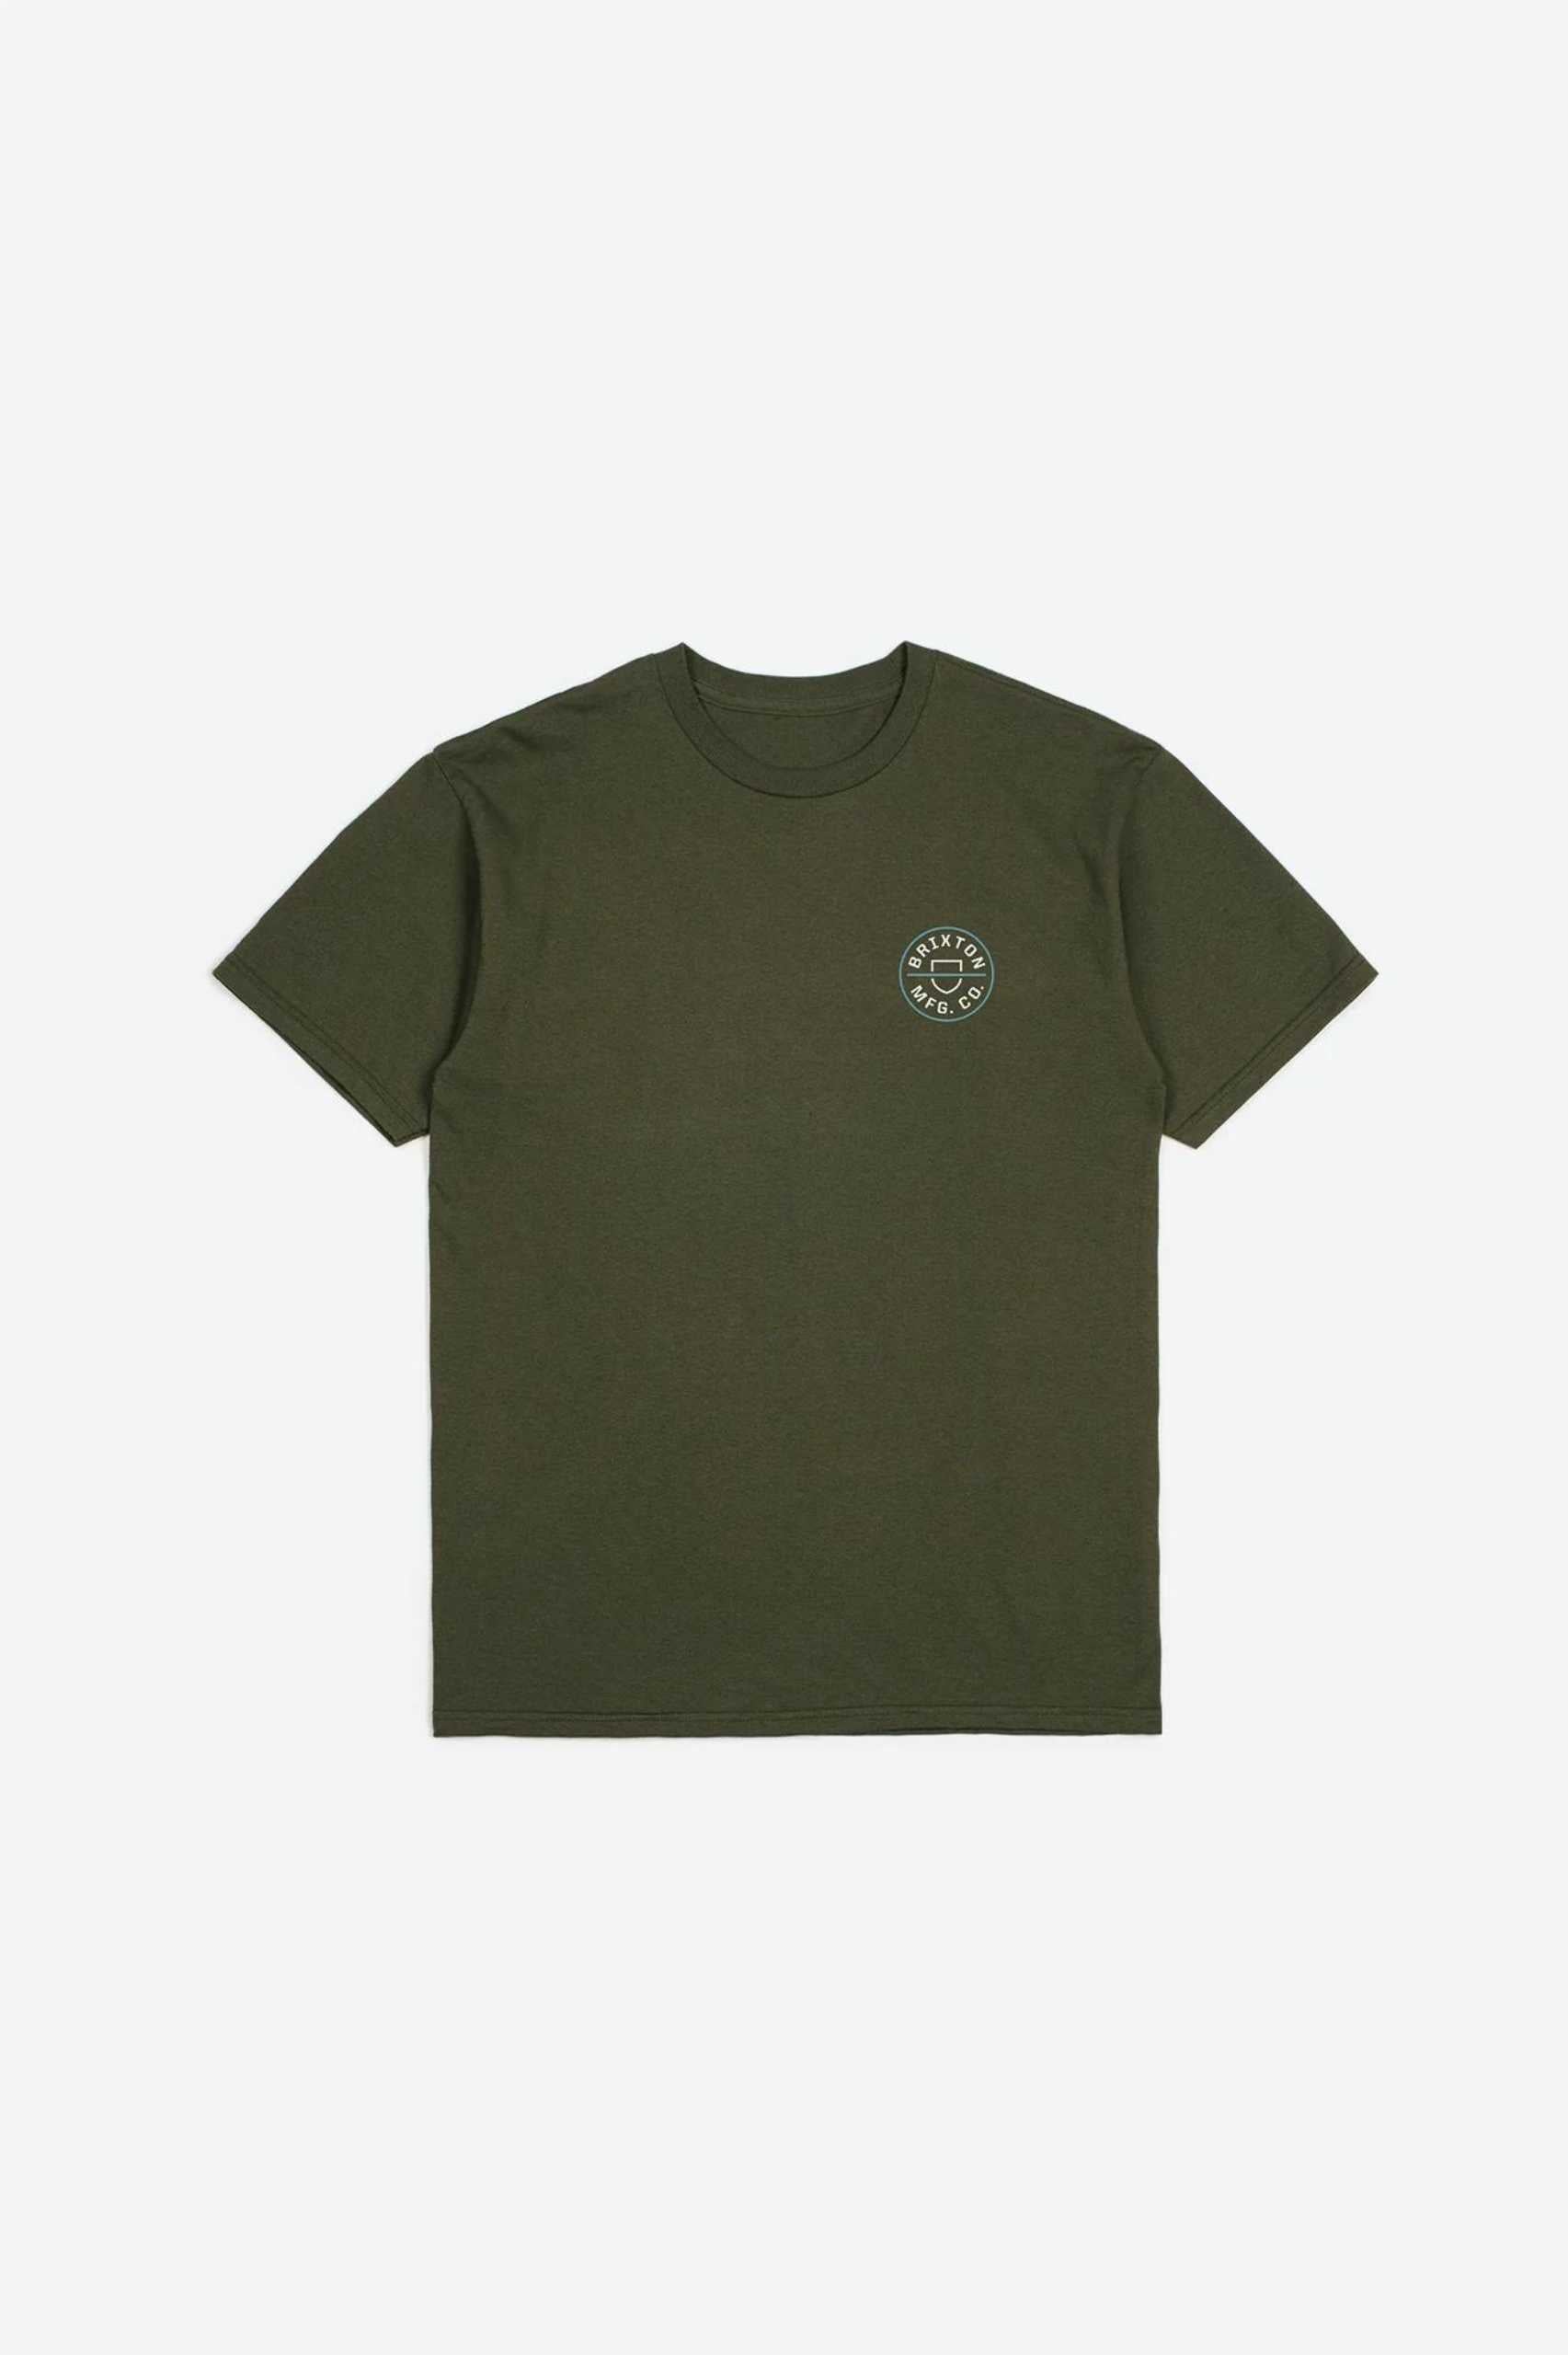 Brixton Boys Crest S/S Standard Tee in Military